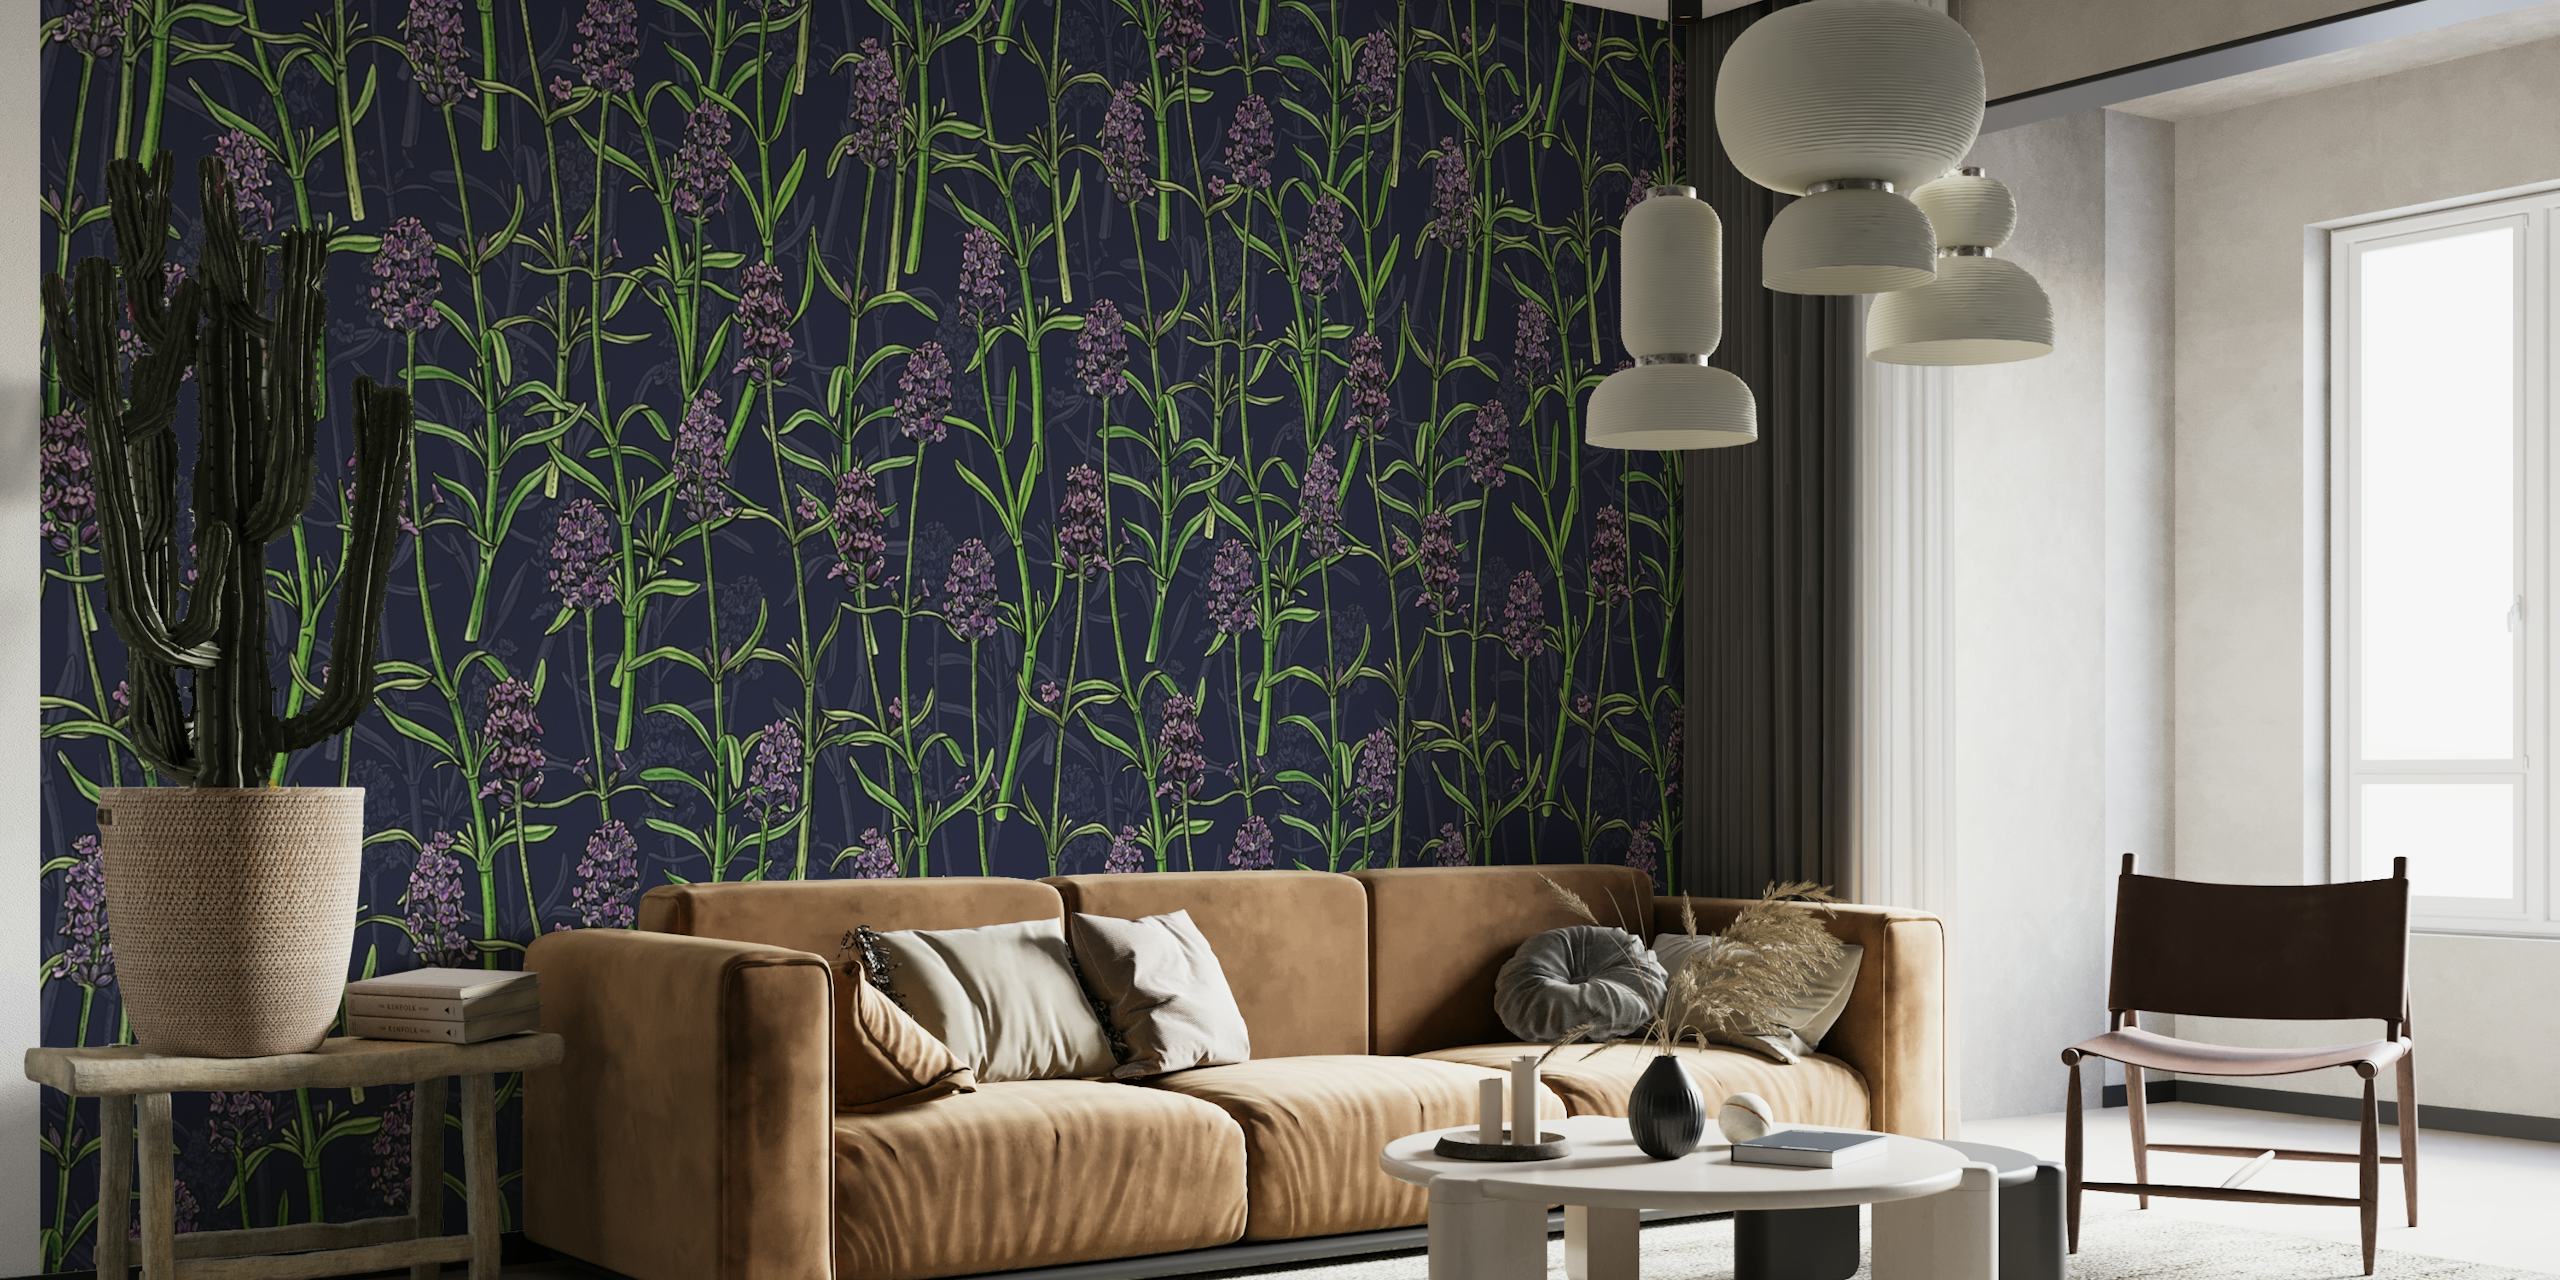 Lavender wall mural with dark background and green accents